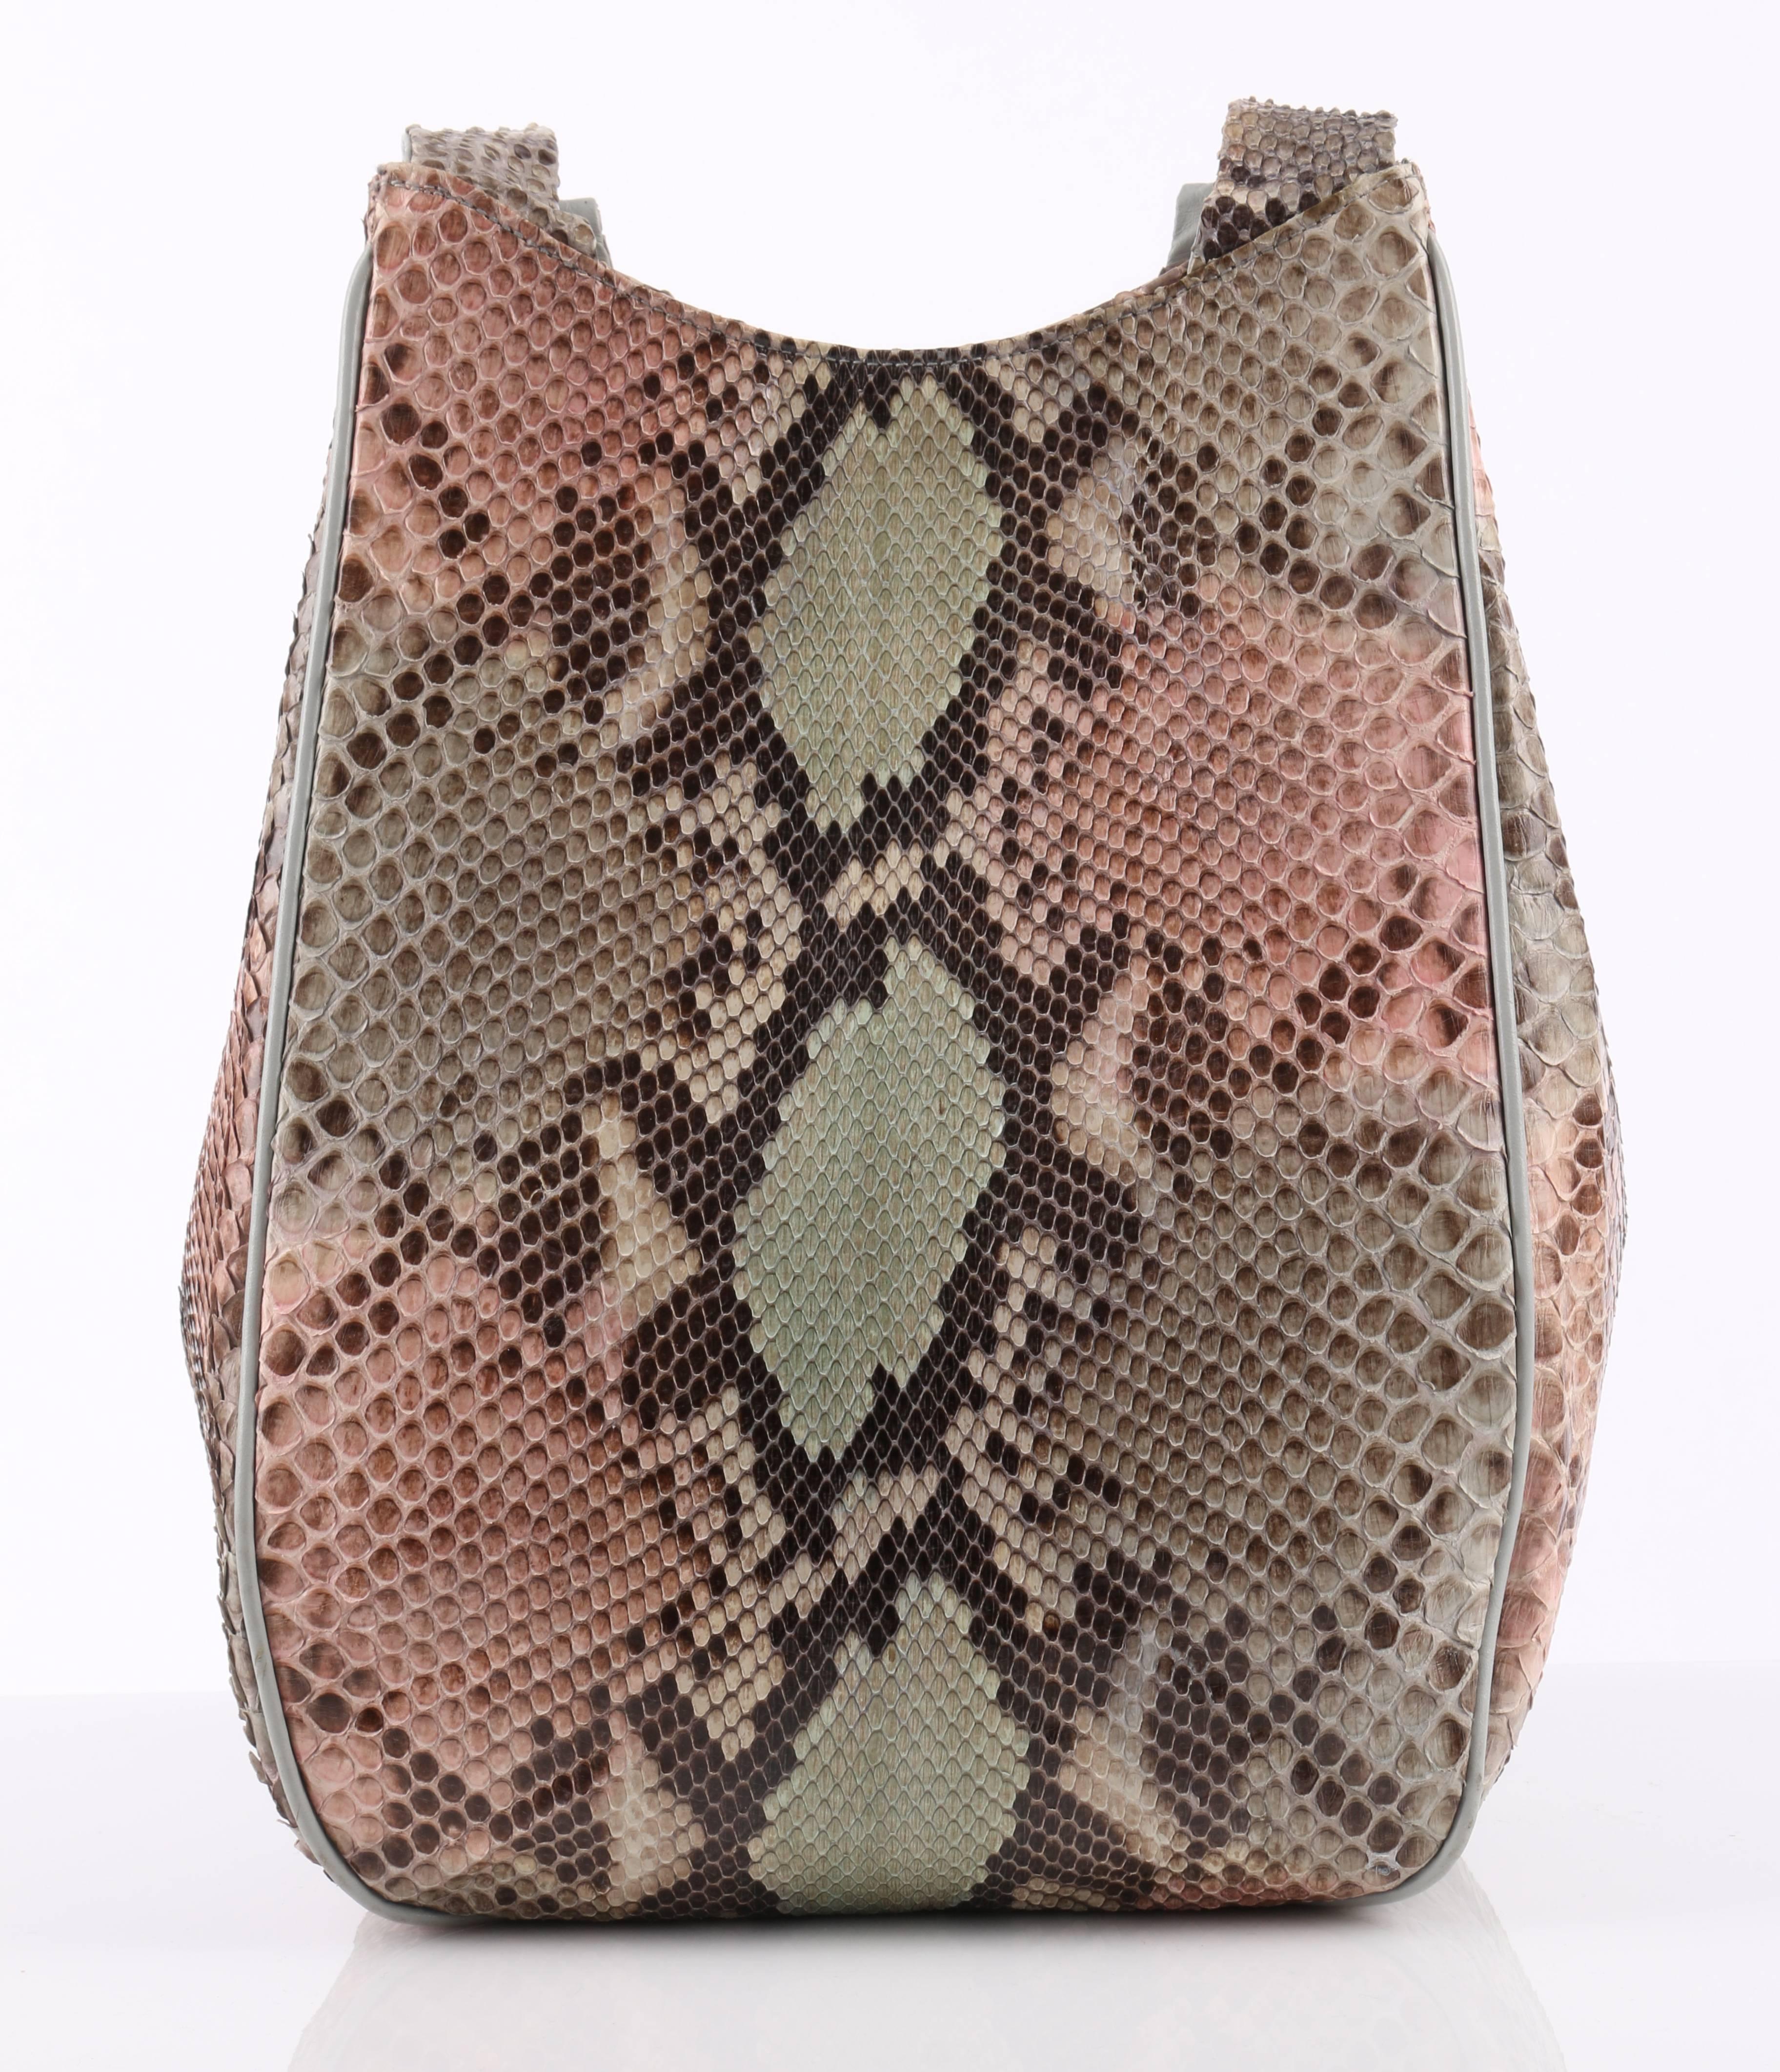 Vintage 1970's Halston beige, pink, brown, and green pastel genuine snakeskin leather handbag and shoes. Handbag has leather lining. Open top. Secures with single gold-tone snap closure.  Peep toe pumps have ruched / gathered detail on the upper.